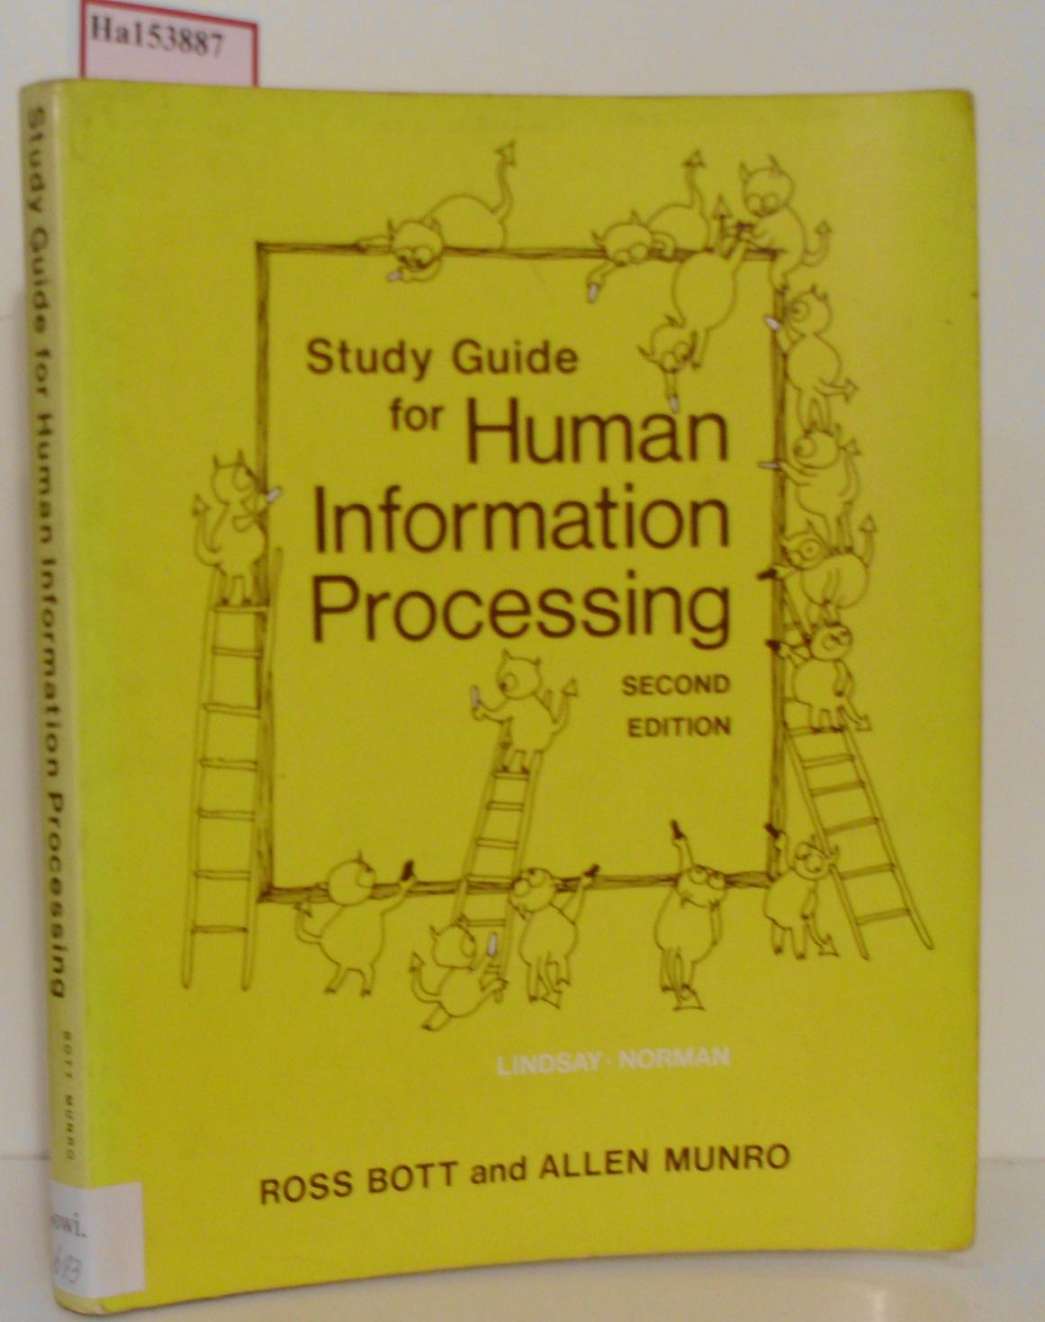 Study Guide for Human Information Processing. Lindsay. Norman.  2 - Bott, Ross and Allen Munro